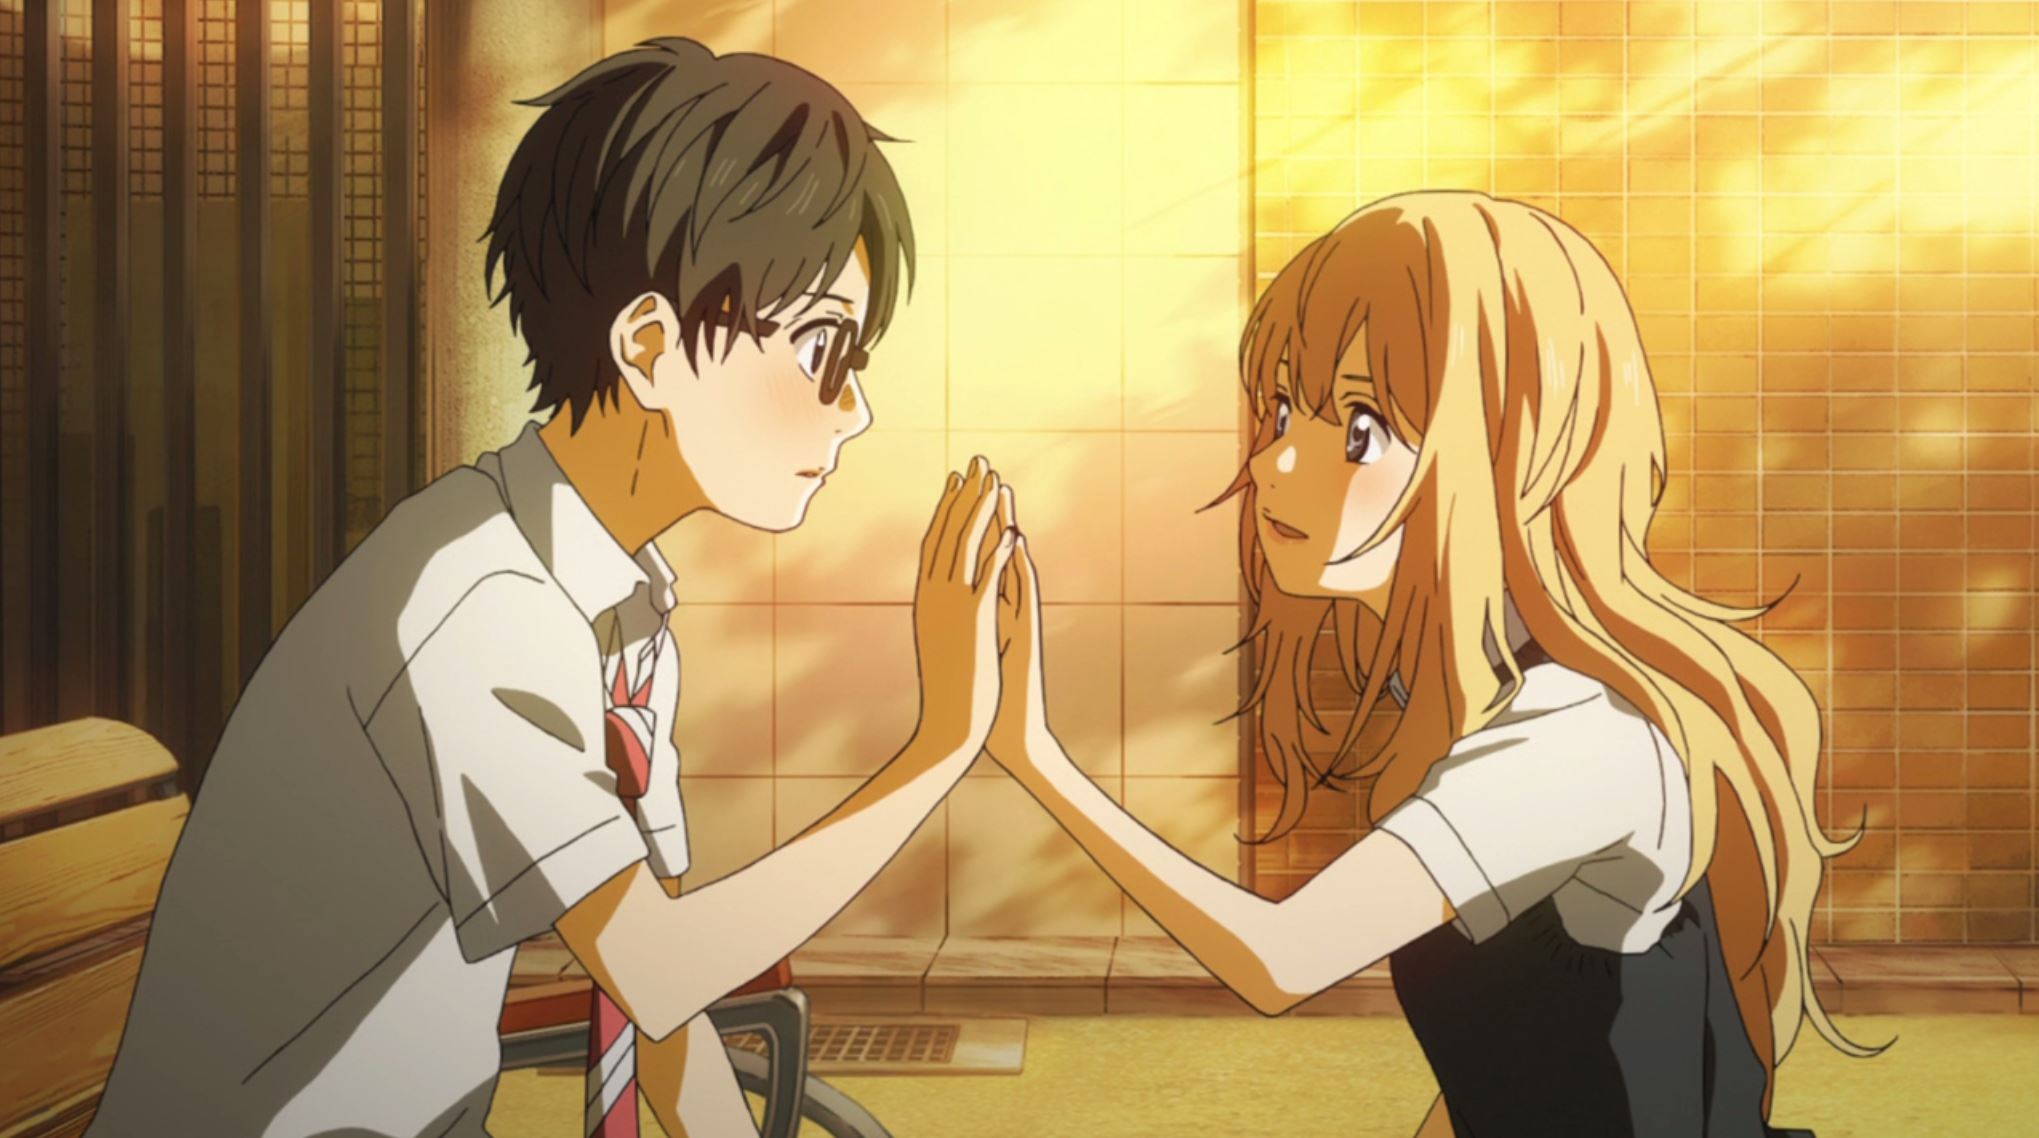 Top 7 romantic anime series to watch this week